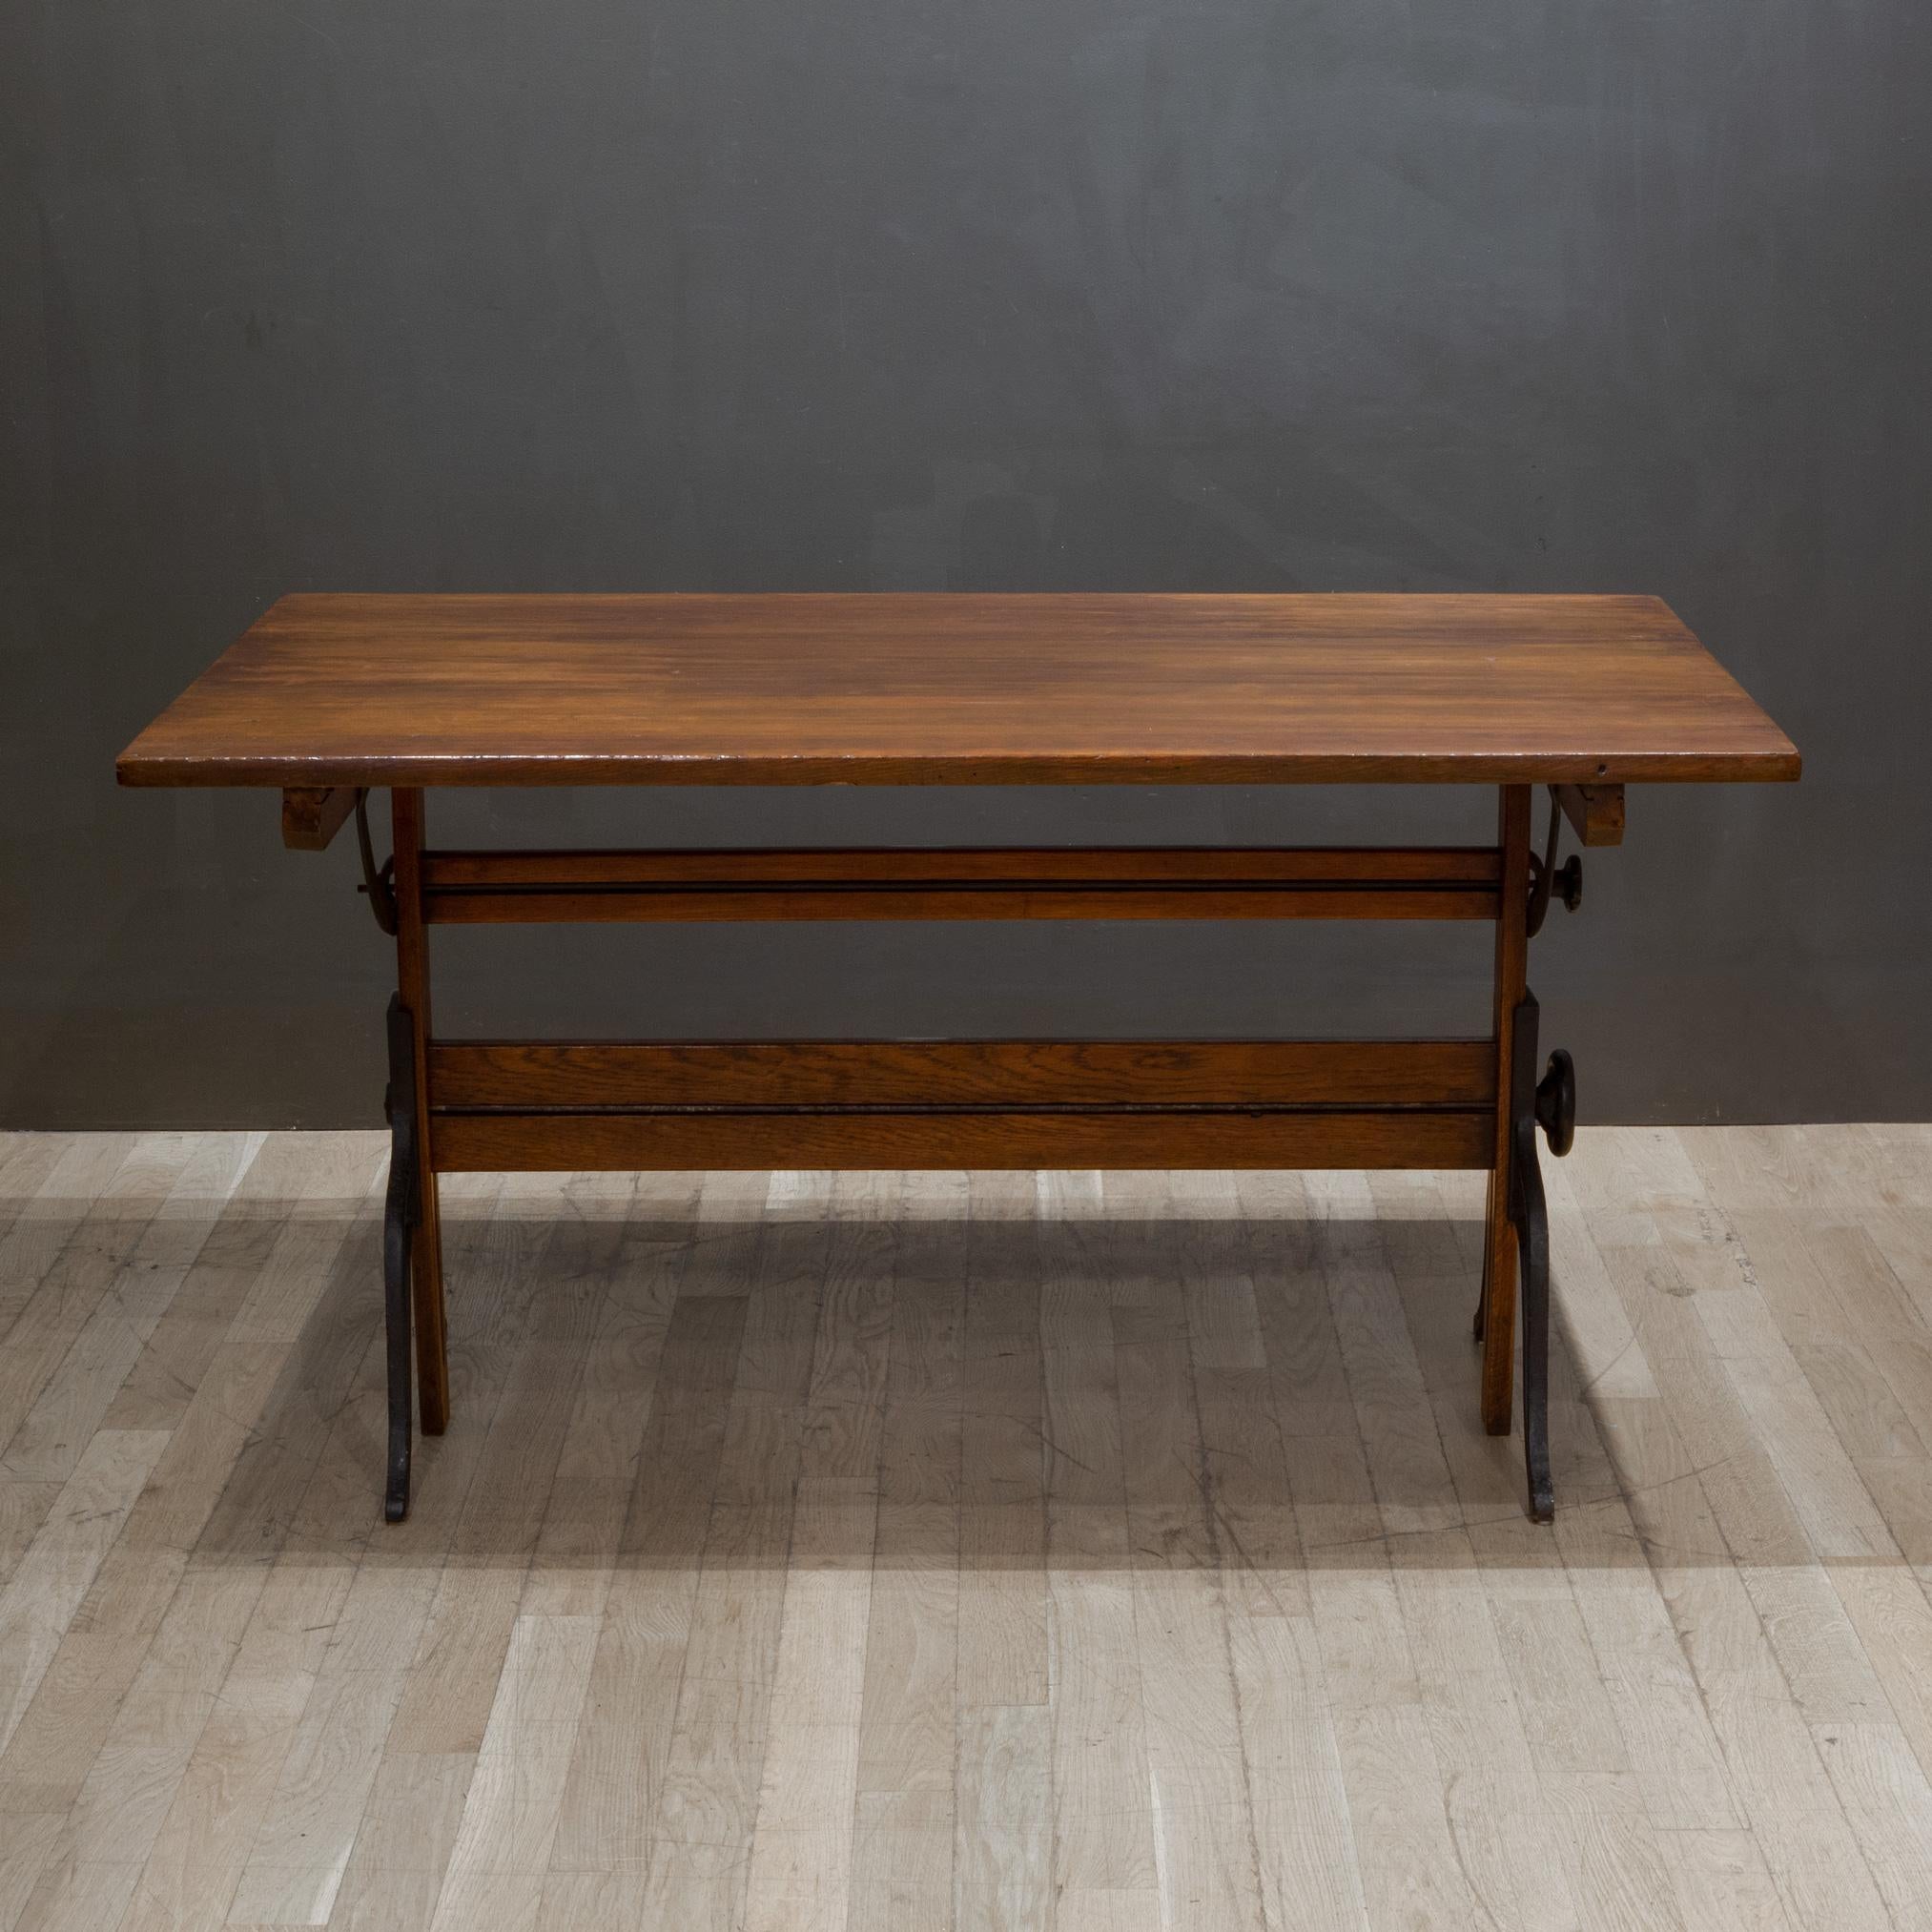 American Antique Refinished A. Lietz Co. Wood and Cast Iron Drafting Table, circa 1930